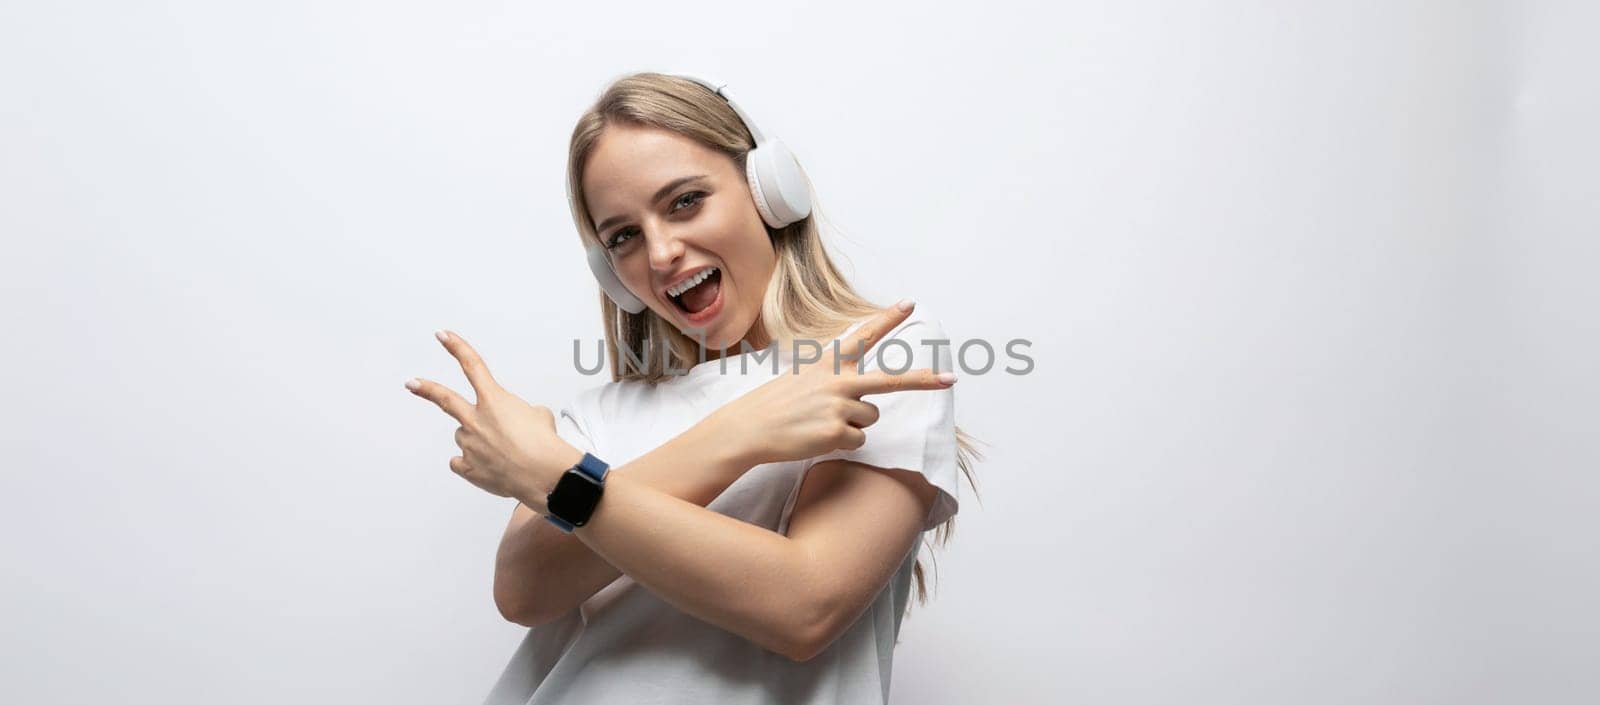 young woman having fun with music with wireless headphones in a studio with white walls by TRMK